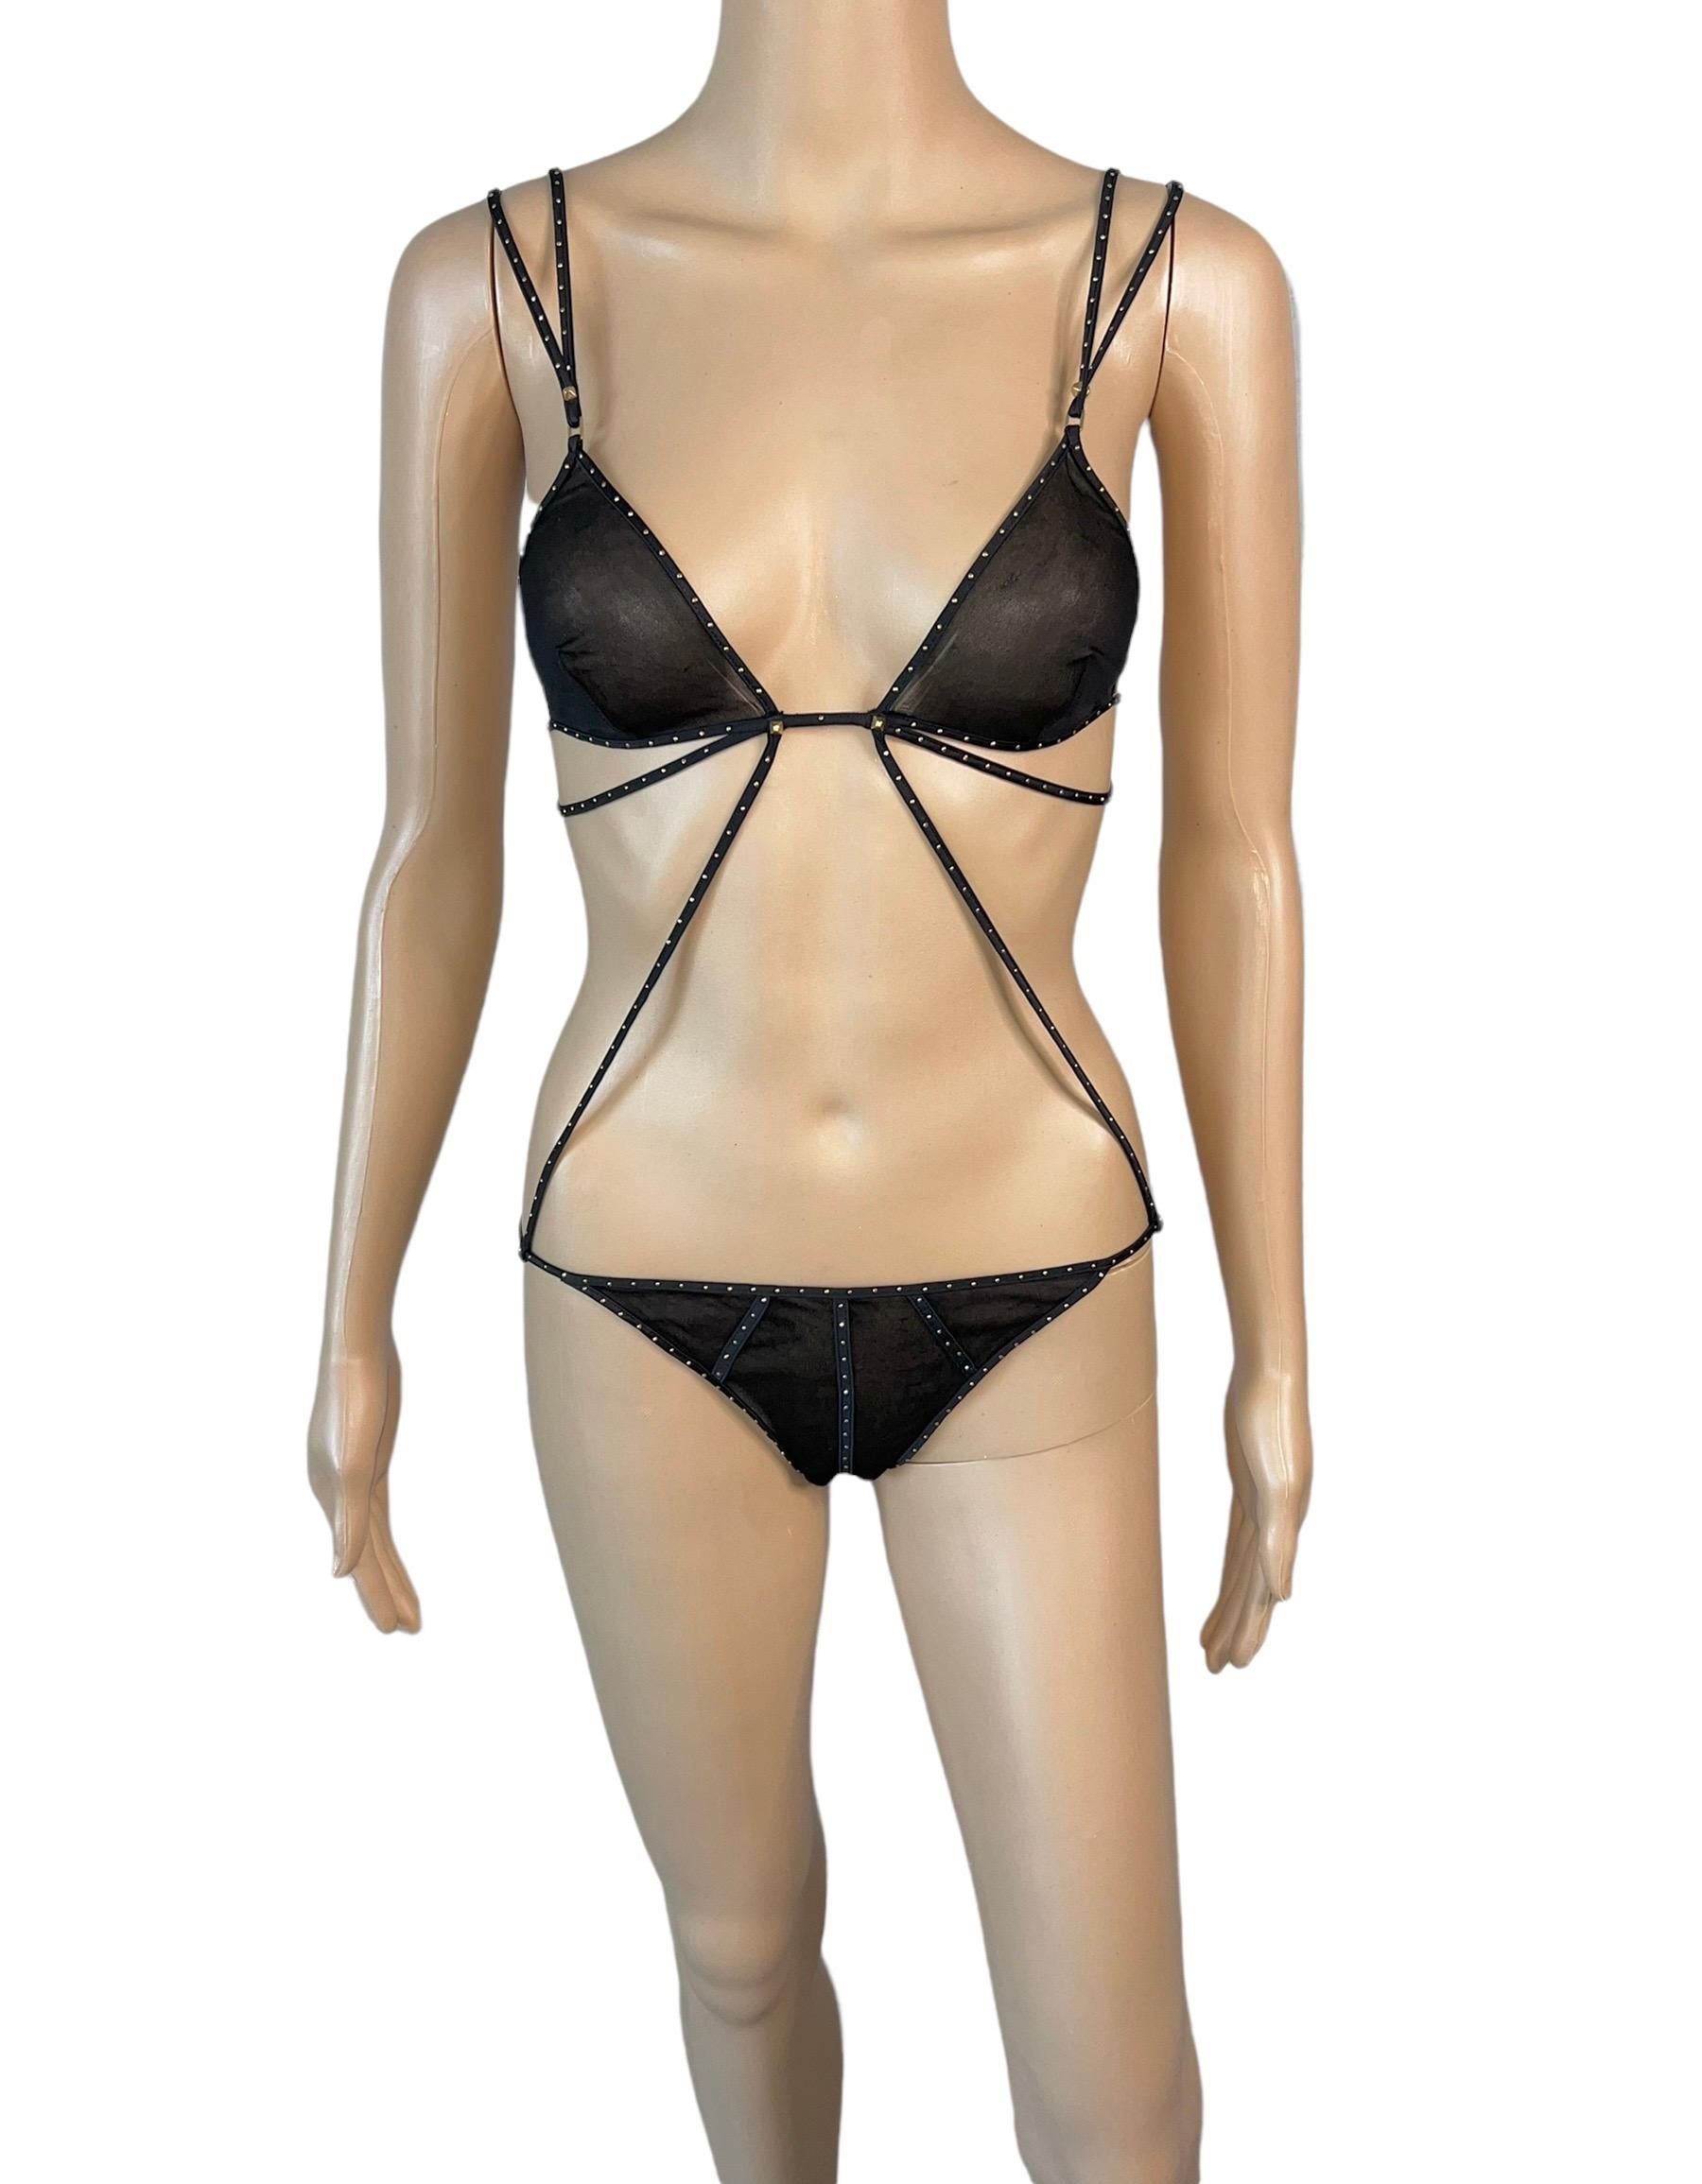 Tom Ford for Gucci F/W 2003 Bondage Studded Wrap Black Sheer Bodysuit Lingerie Size S

Please note this item has some wear and pulling throughout the mesh.

